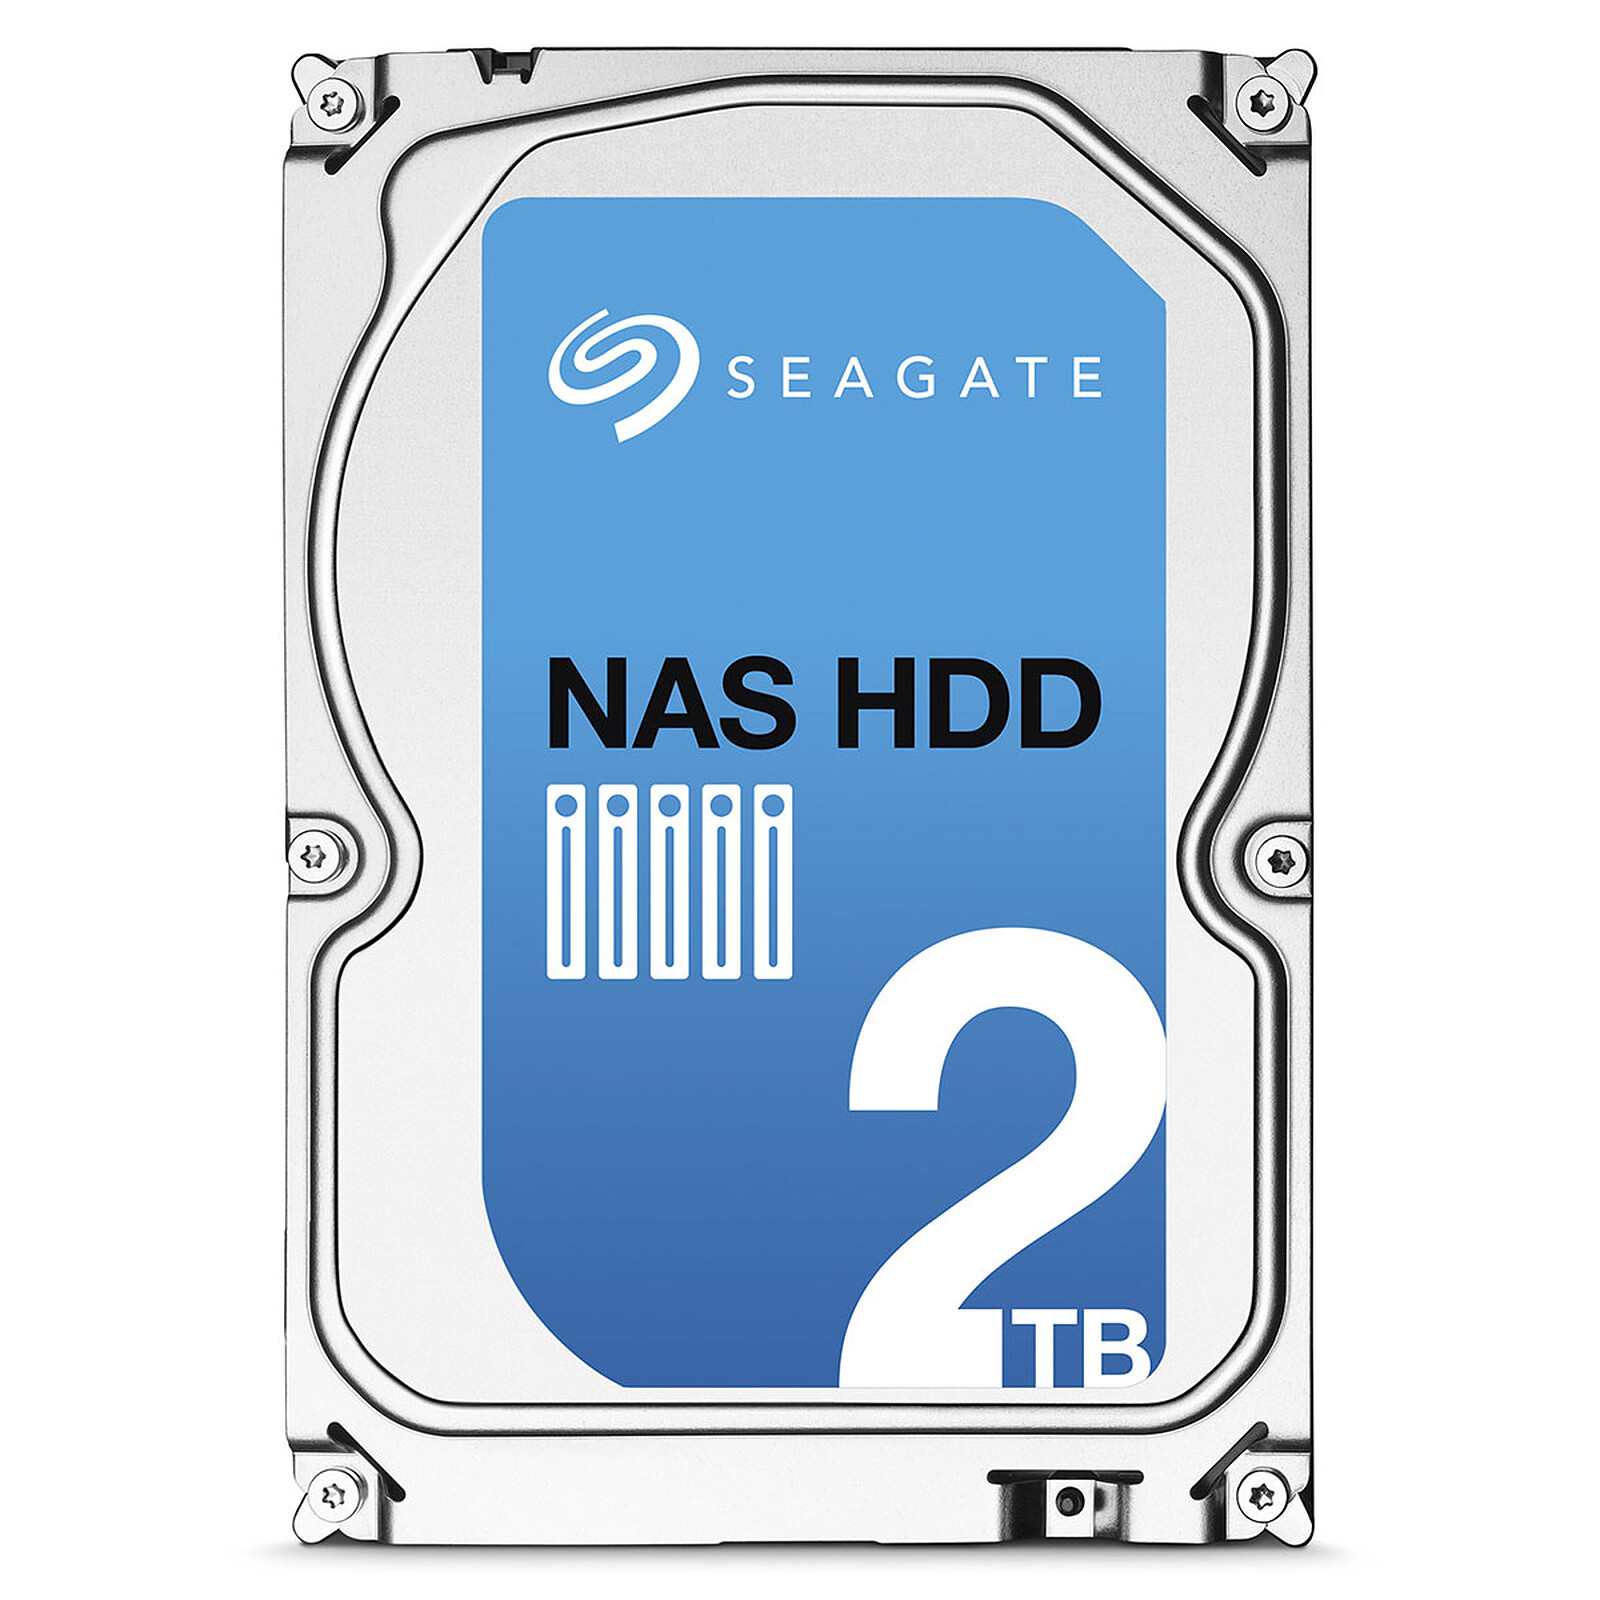 Seagate Nas Hdd 2 To Disque Dur Interne Seagate Technology Sur Ldlc Museericorde